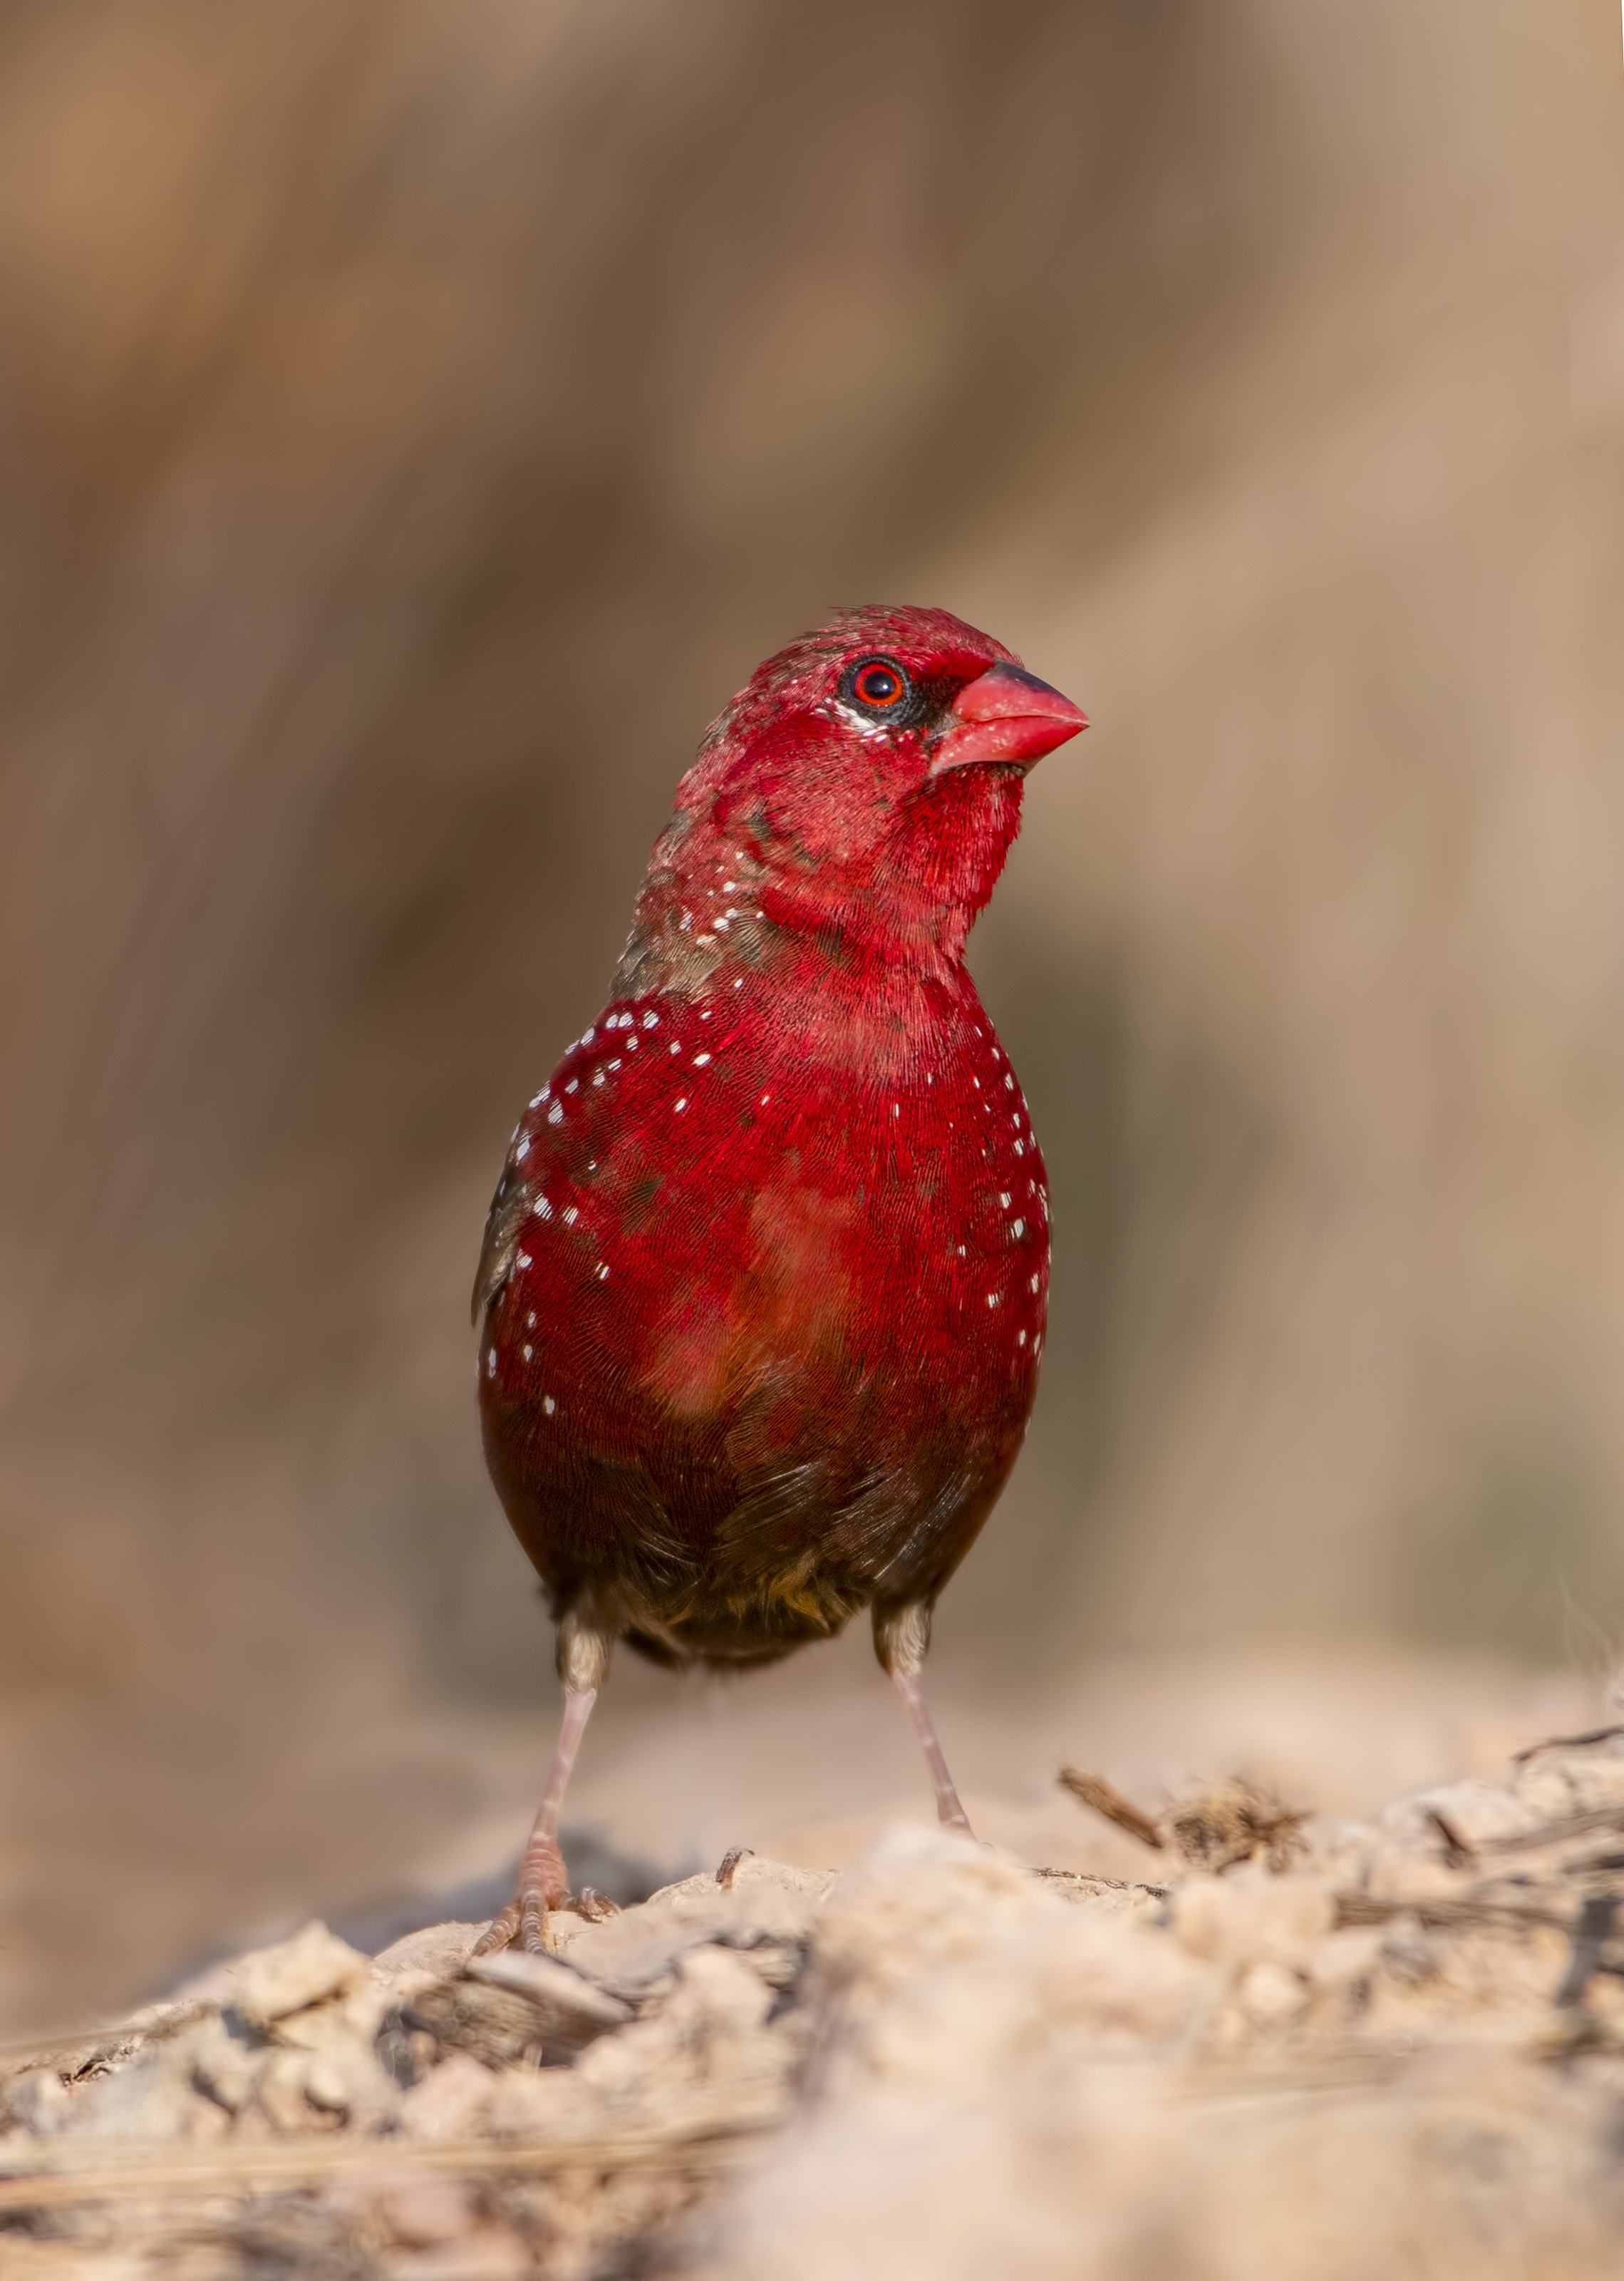 A red bird with white dots